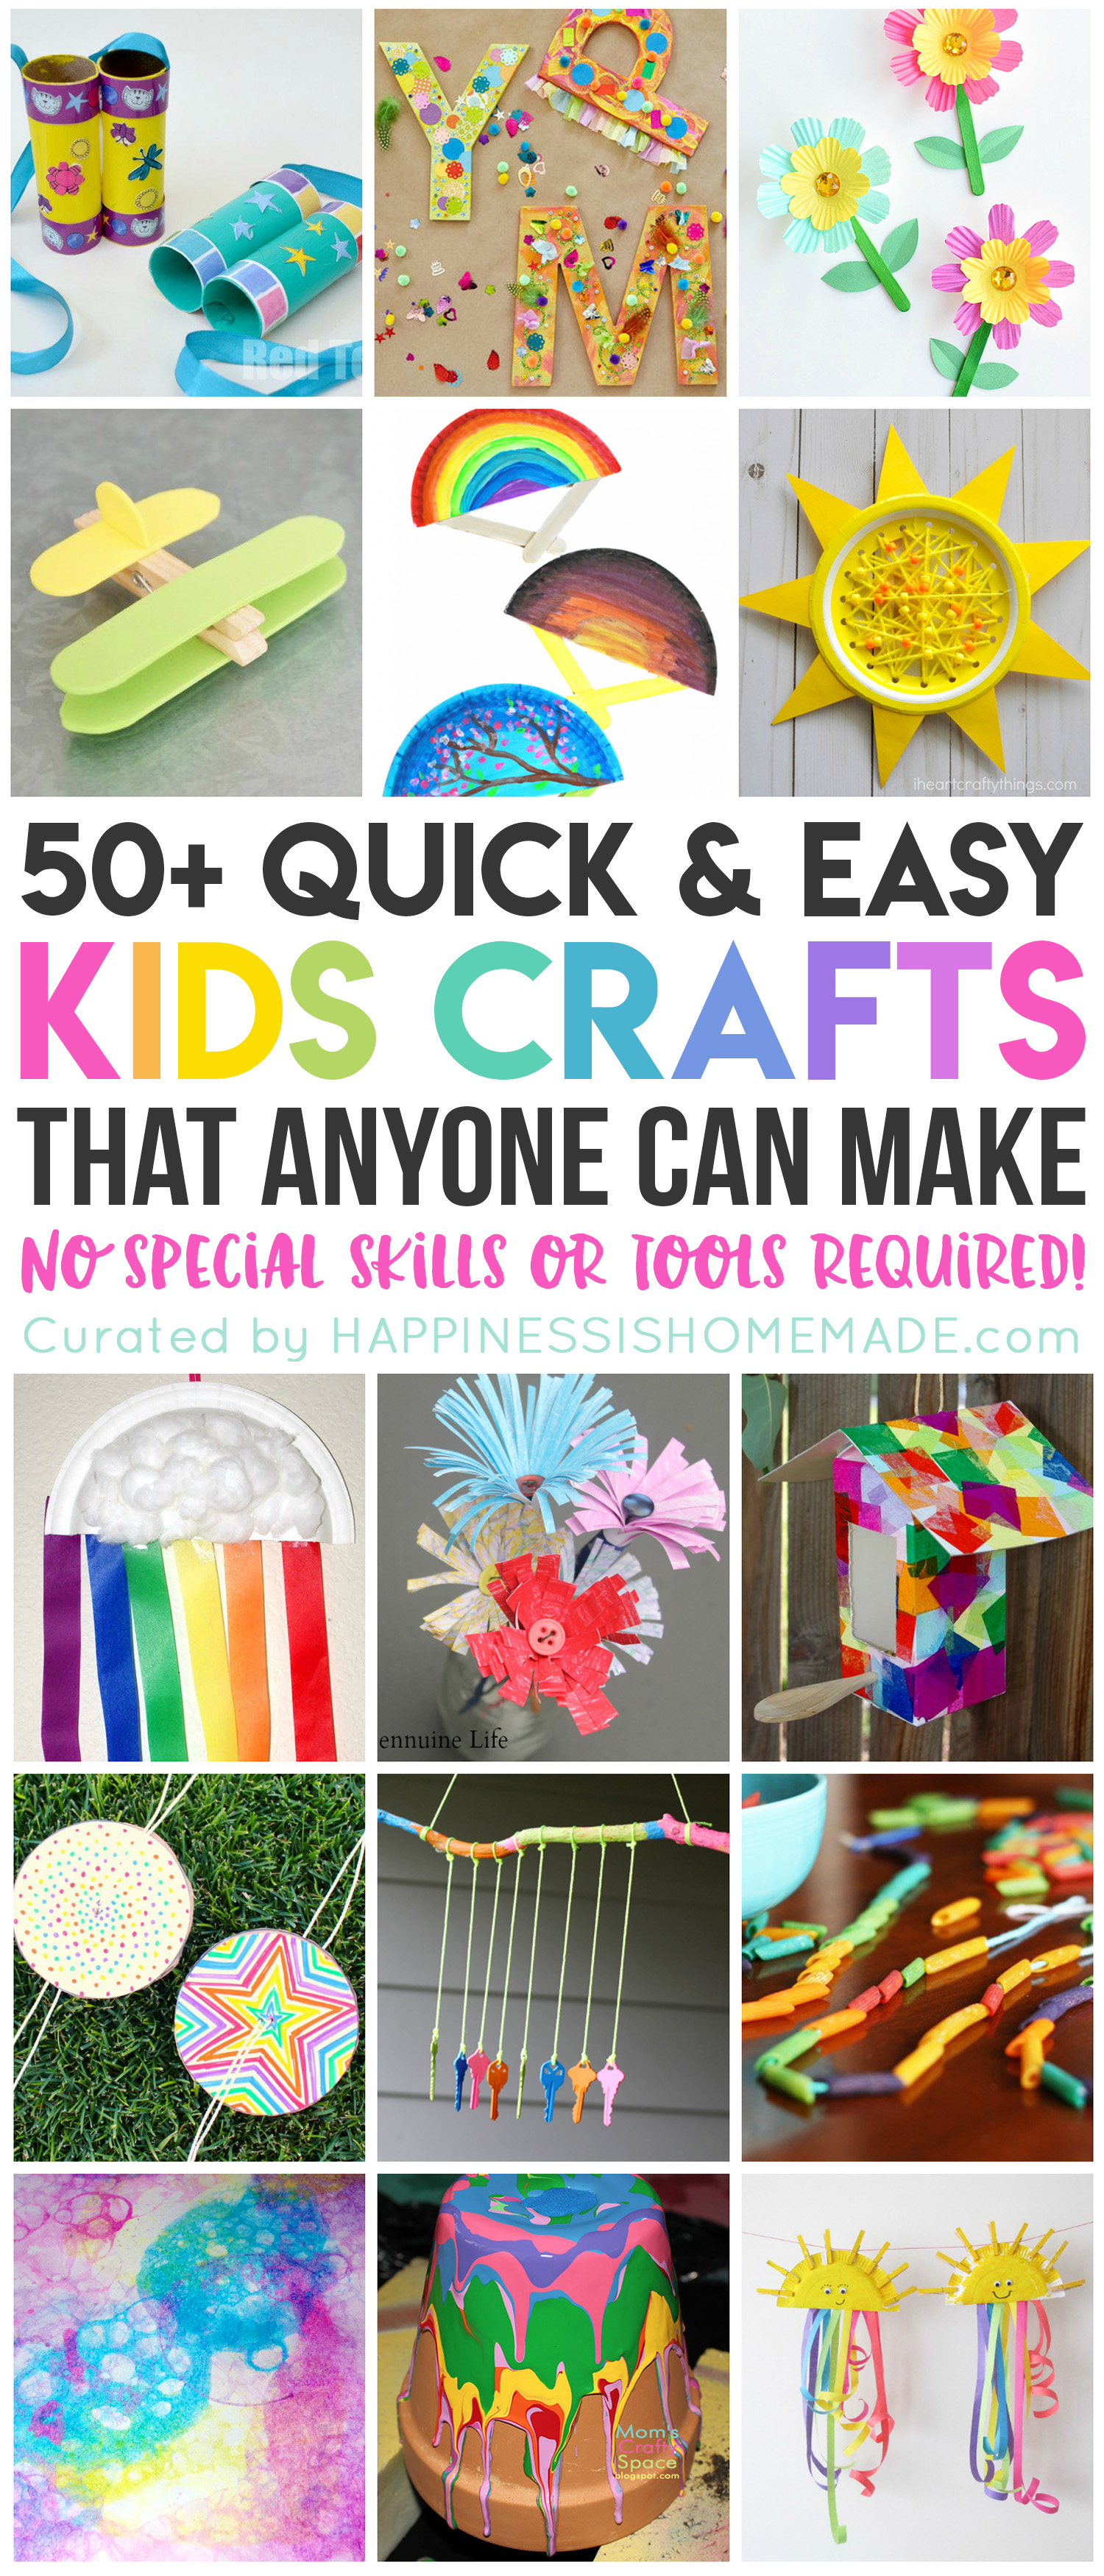 6 Easy Crafts For Kids To Do While You're Working - SavvyMom